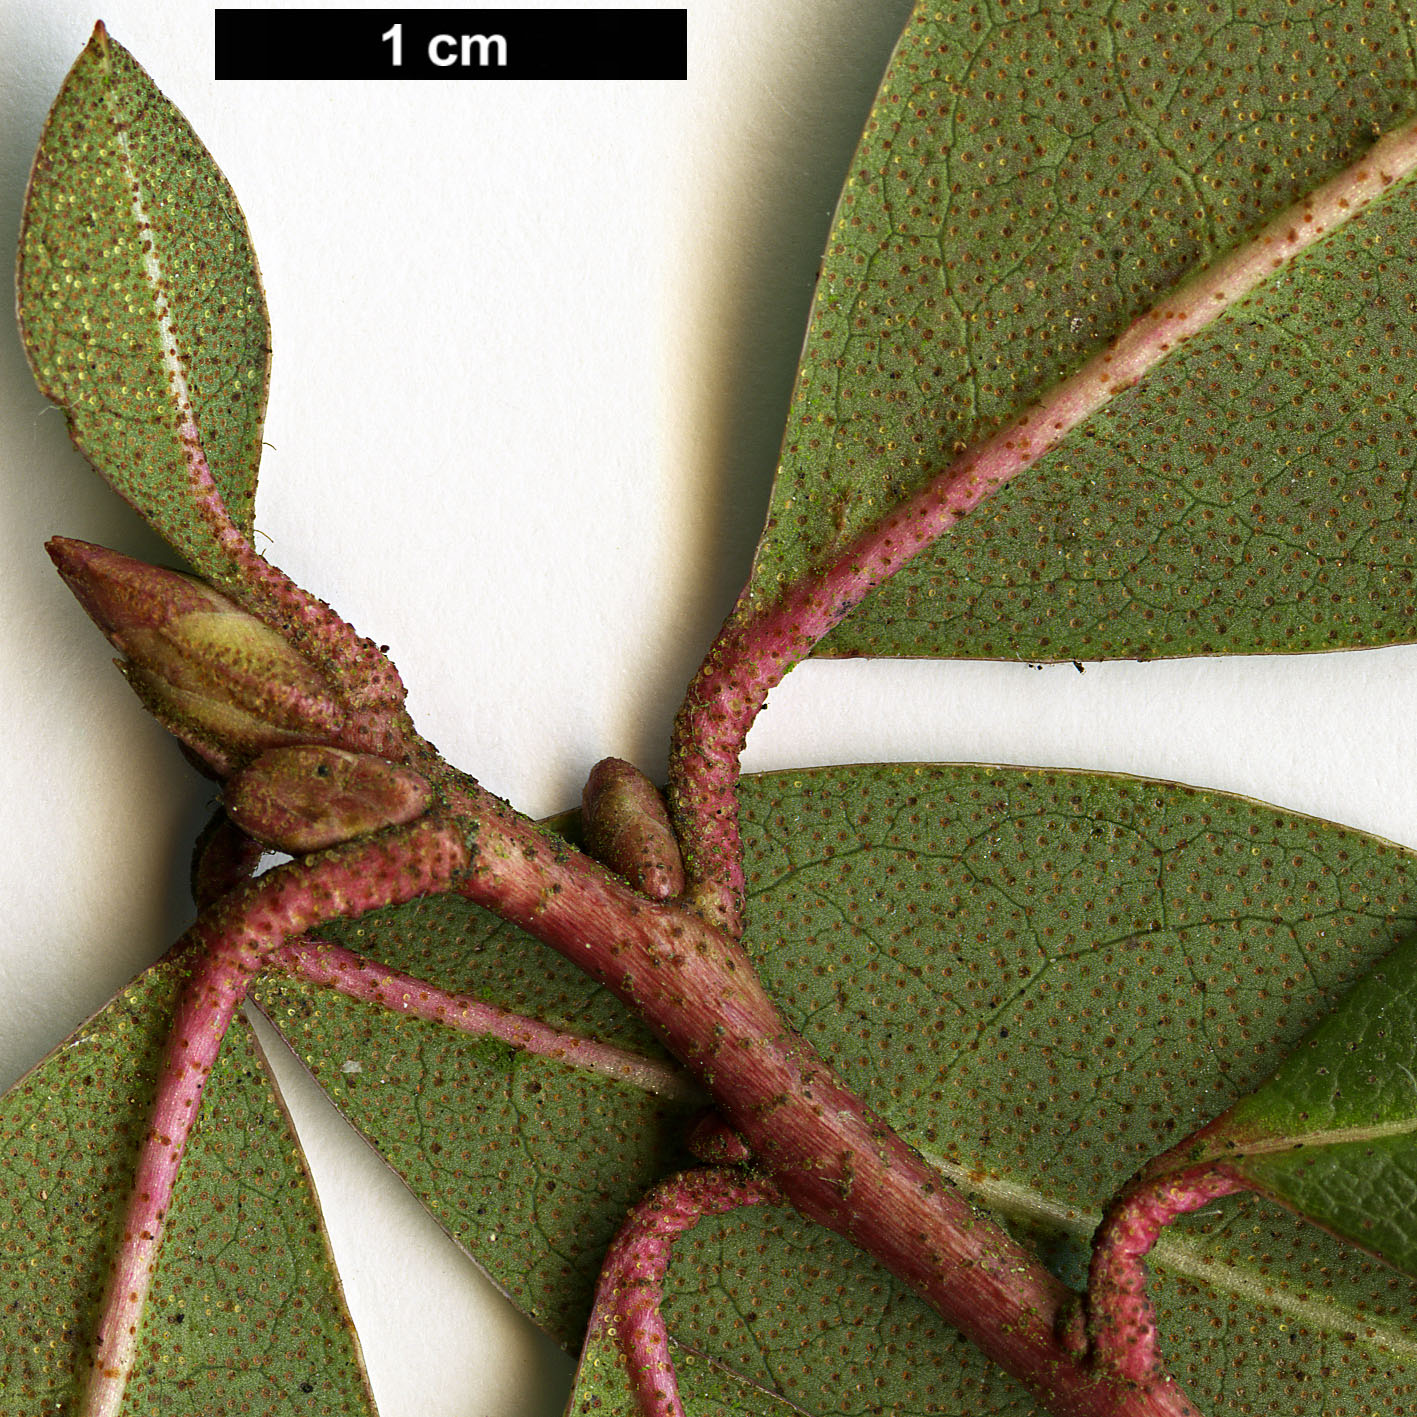 High resolution image: Family: Ericaceae - Genus: Rhododendron - Taxon: searsiae